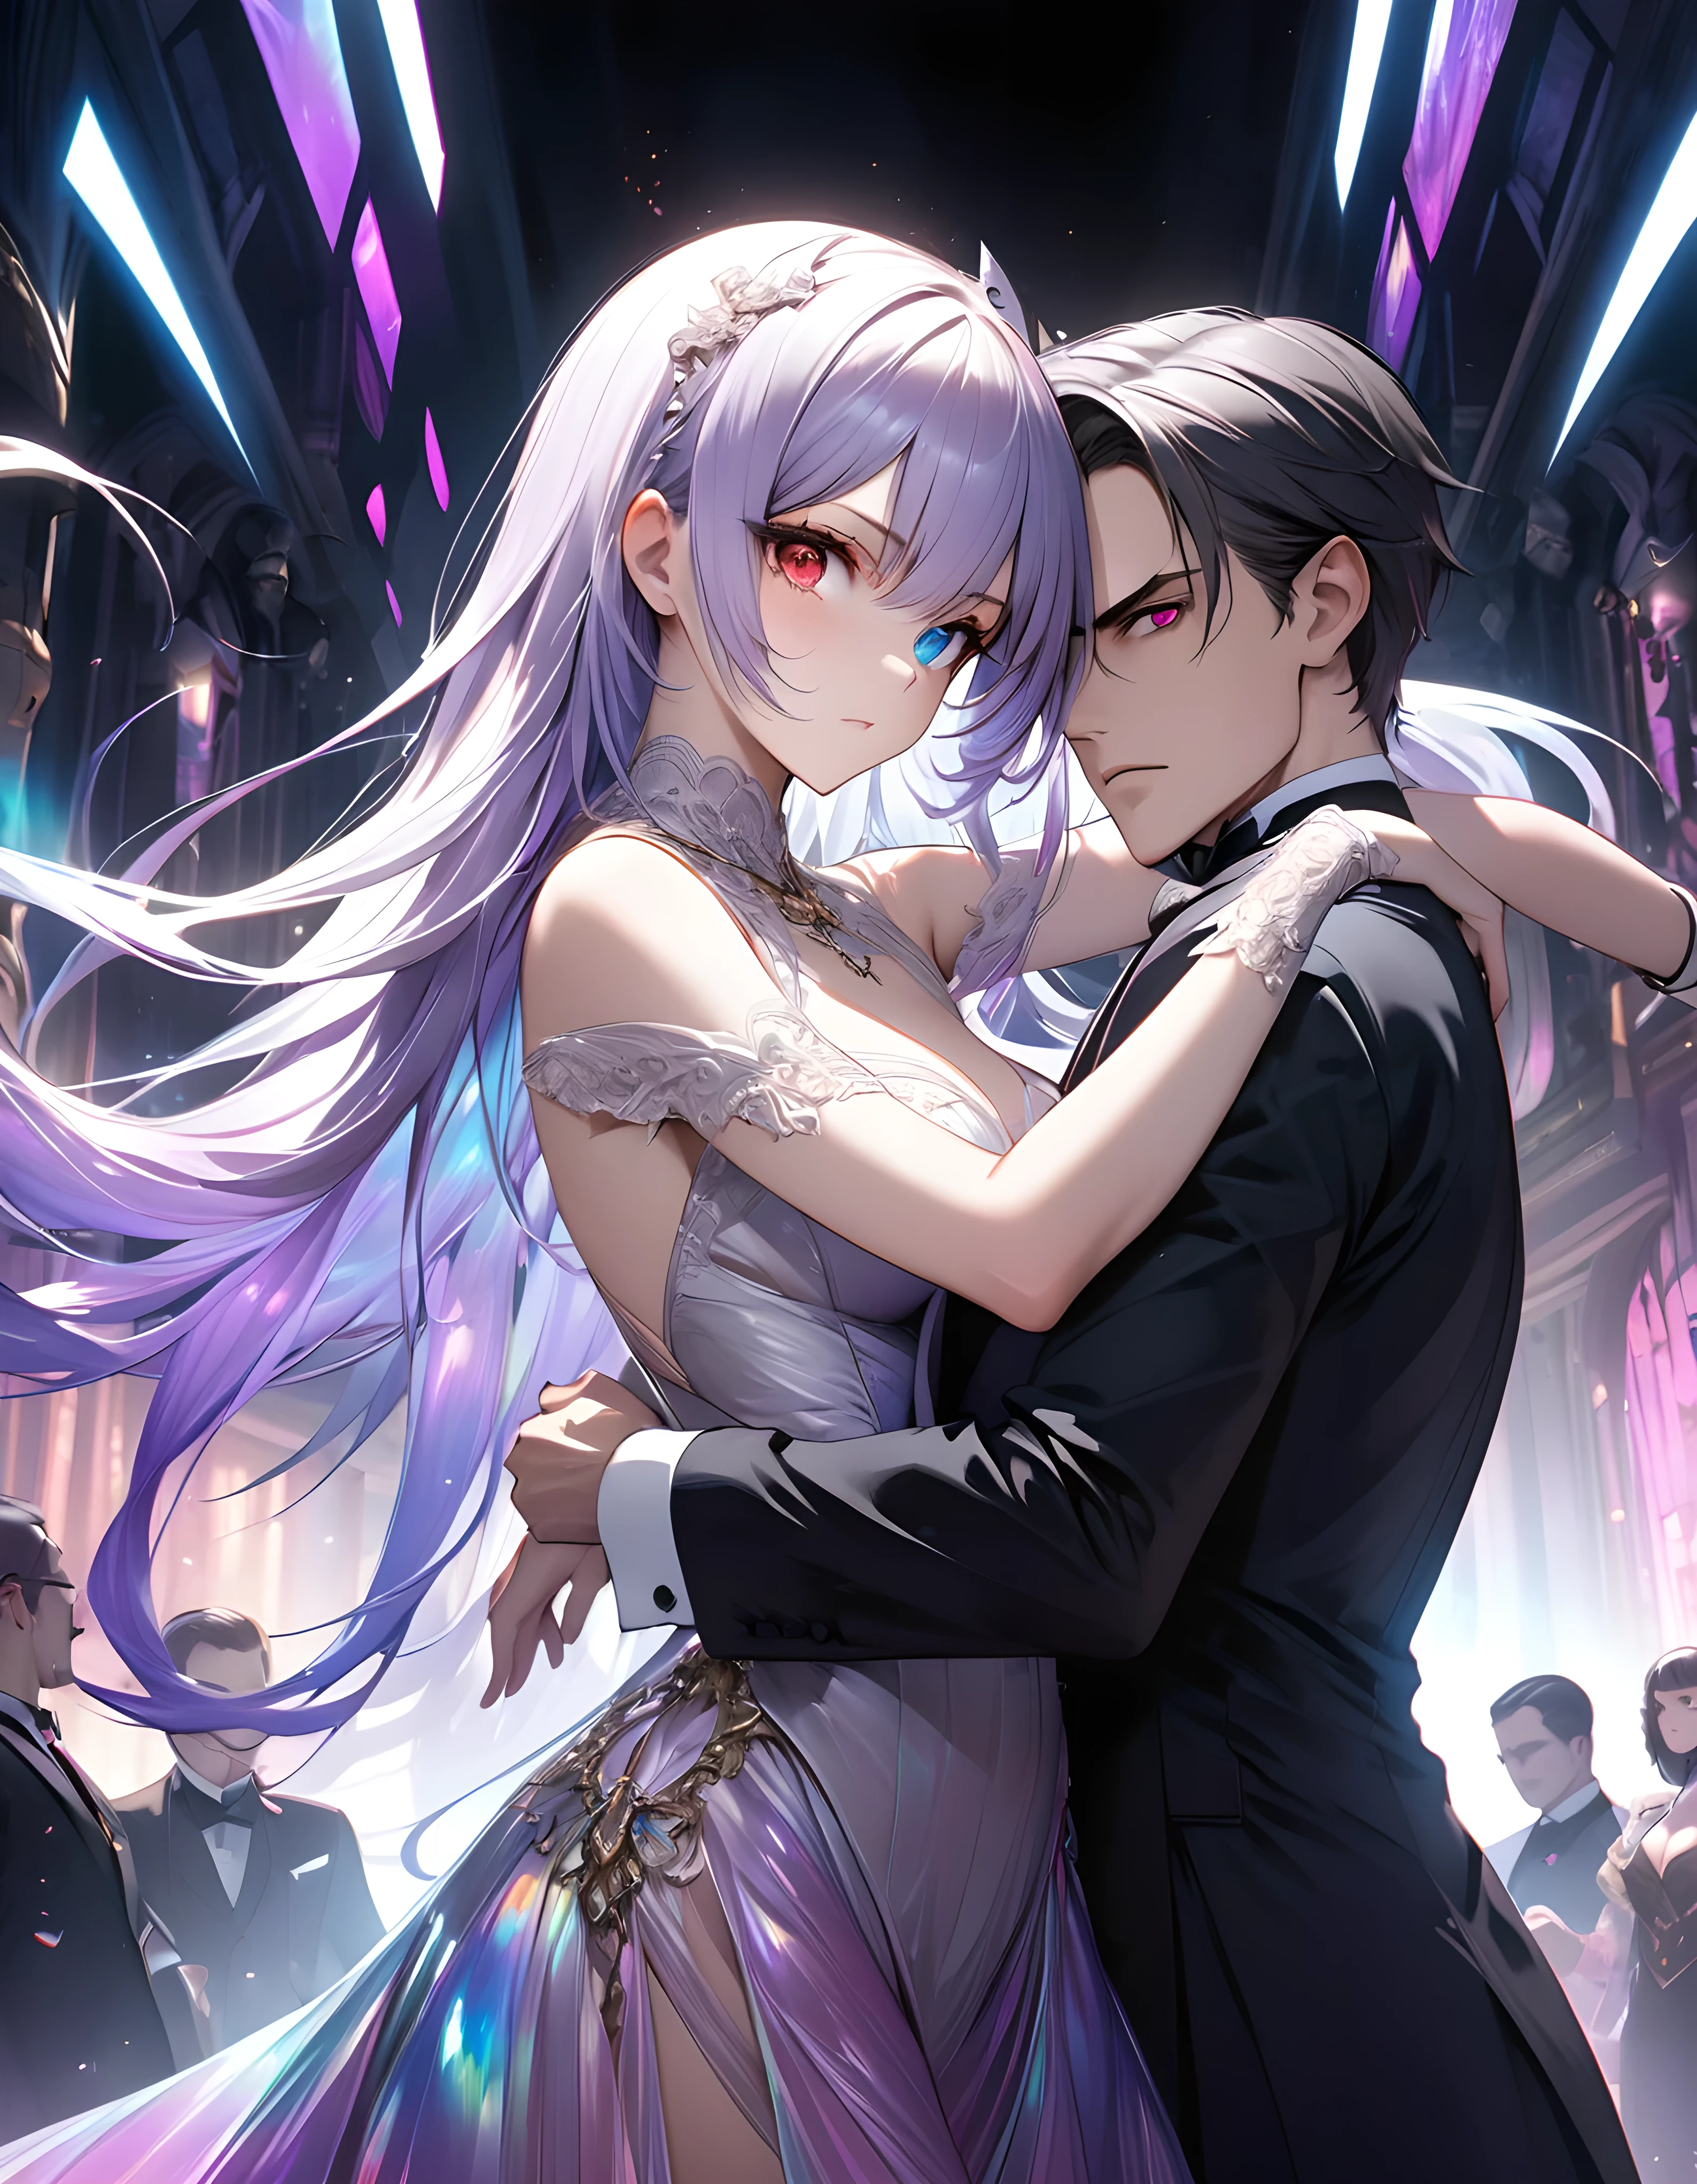 Dark fantasy, Ultra-realism, Detailed and clear depiction, ((A man and woman dancing while embracing each other)), 1. BREAK [Succubus|Mata Hari], ((Cryptic Girl)), (Long Hair, White-purple gradation:1.3), (Heterochromia iridis:1.4, Blue Eyes, Red Eye,) Eyes staring at the viewer, Glass-like transparency, An attack that captivates the crowd, 2. Details of BREAK Dracula, Gentleman, Tuxedo, Strict and upscale, highest quality, Highest quality, Highest Resolution, Dynamic perspective, Phantasmal iridescent, Blacklight, BREAK (Indifference, kind), neon art background, Cinematic lighting effects, Transparent light, Mysterious Light, Fantastic Fog, BREAK ((Phantasmal iridescent, Holographic)), BREAK Ultra-realism, Ultra-high resolution, Use all kinds of effects to captivate your audience, (Add transparency:1.6), ((Cryptical)),